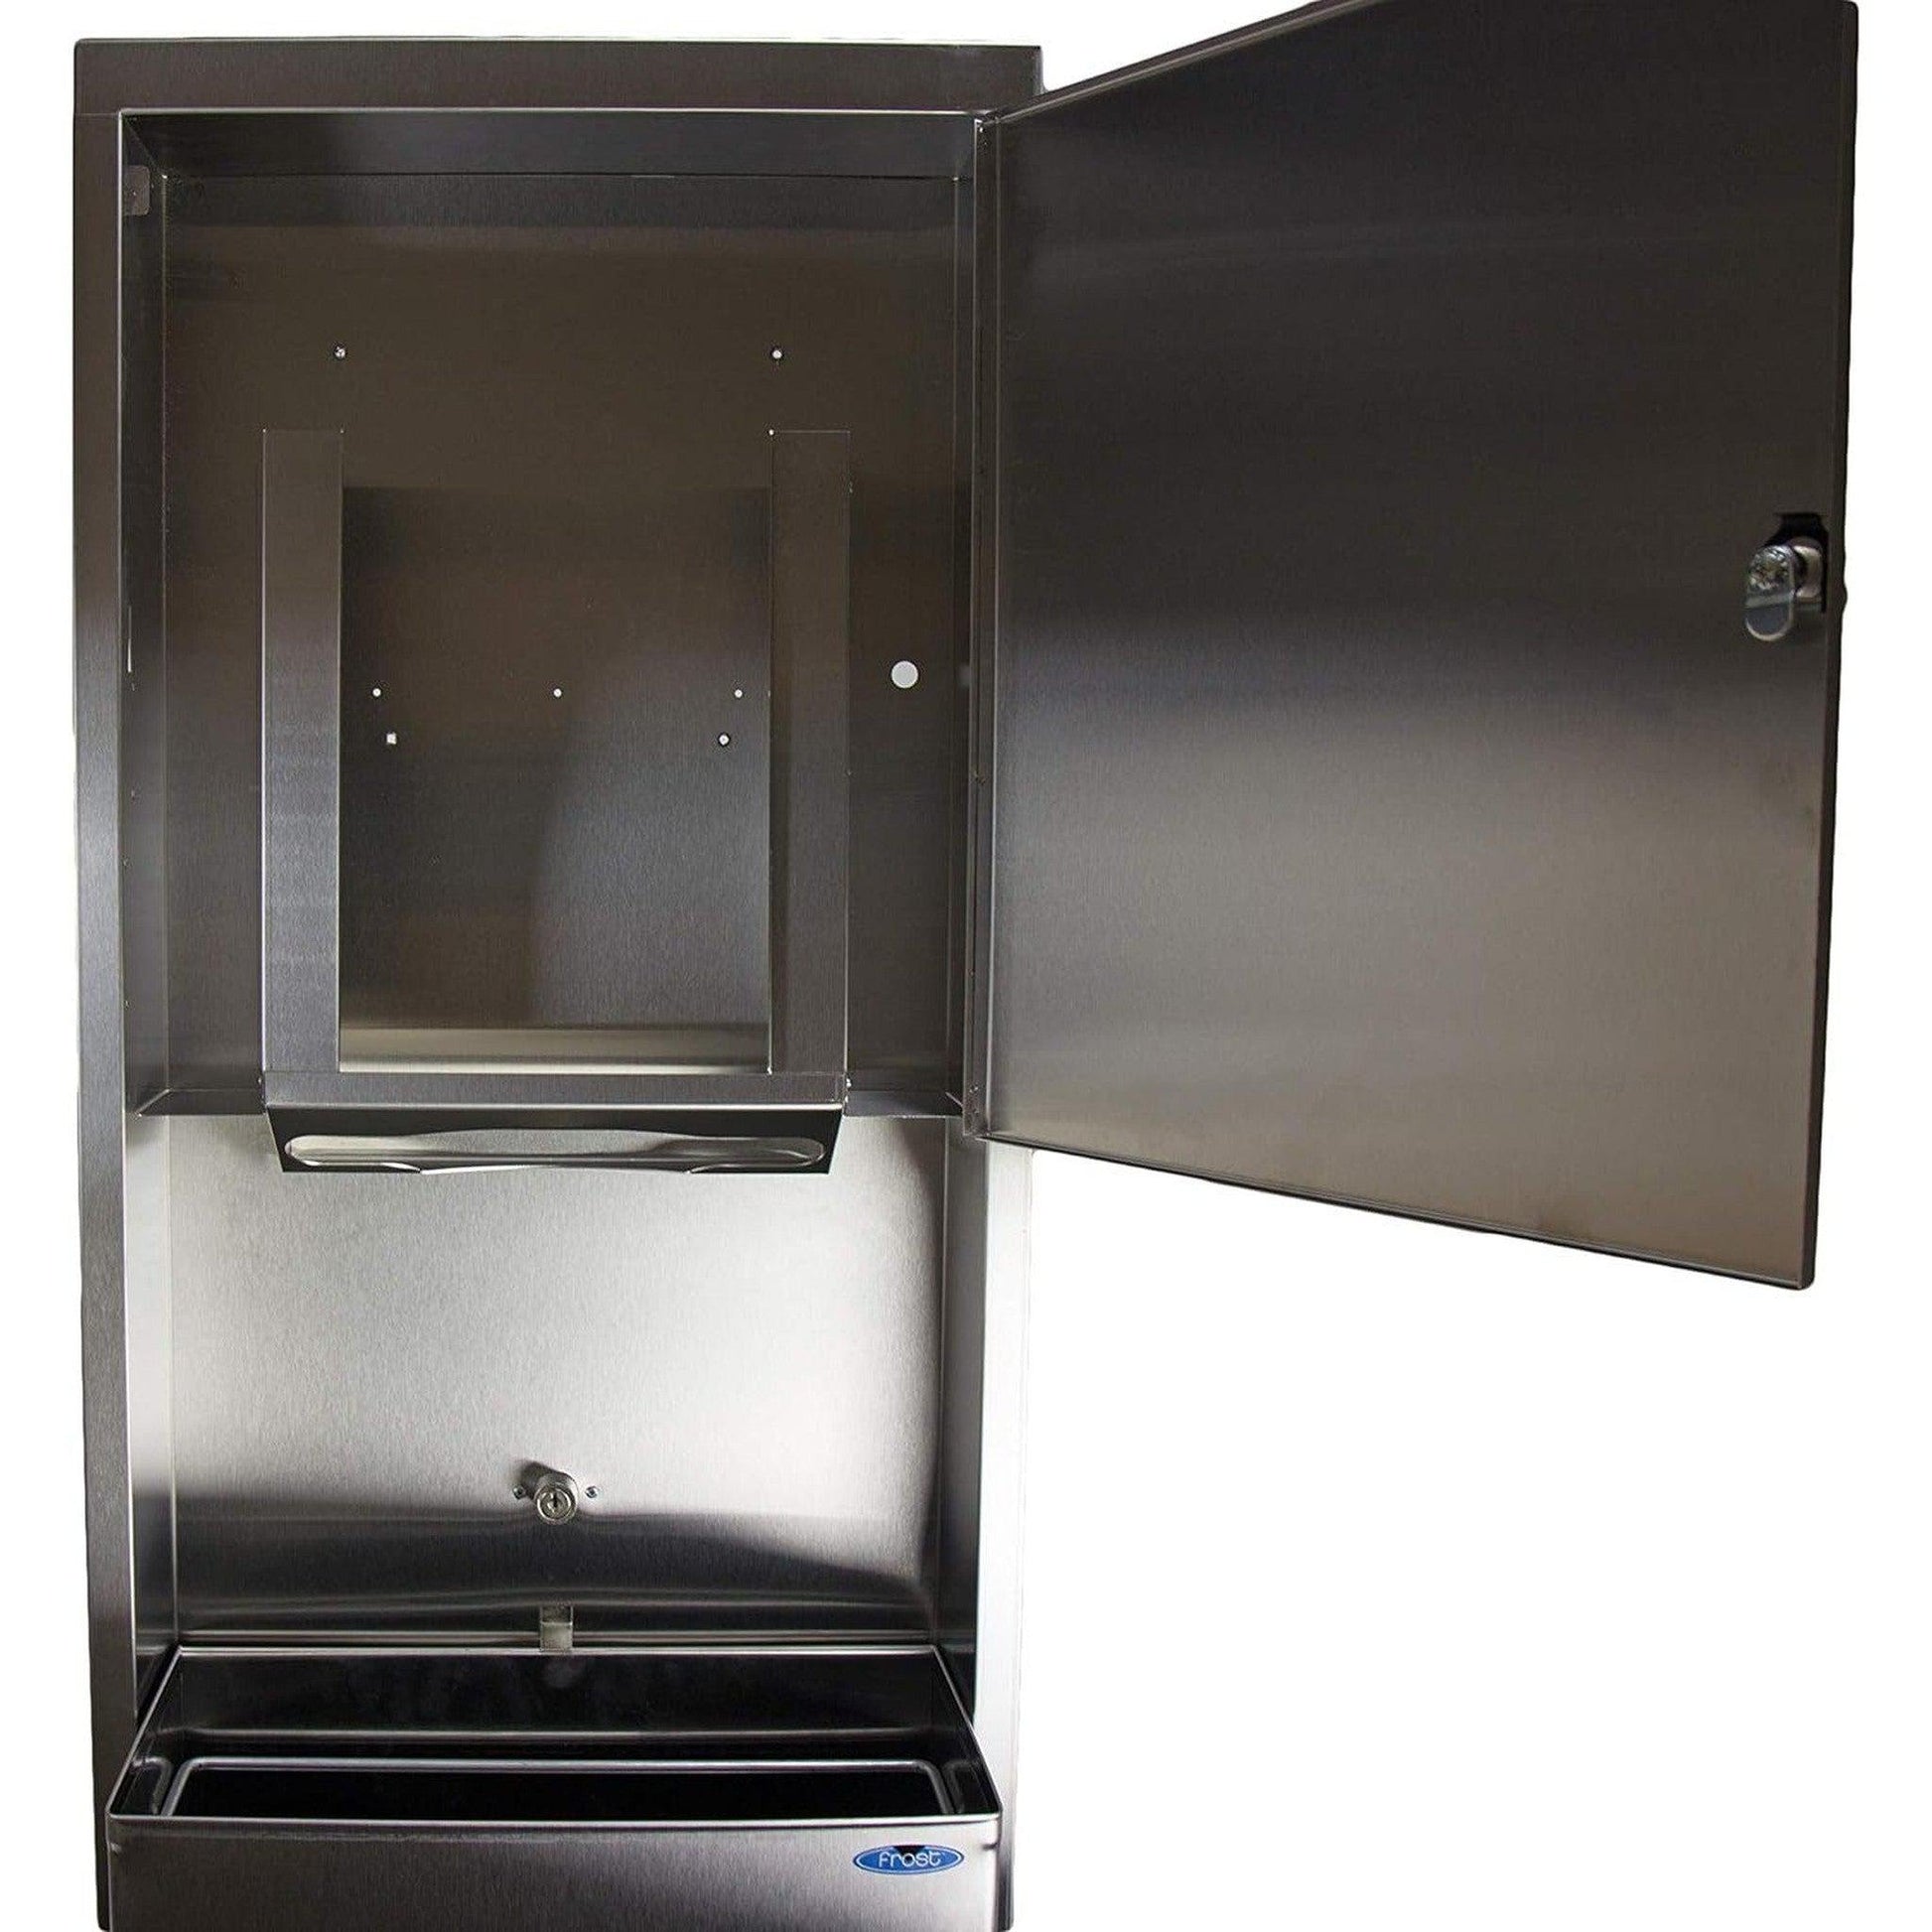 Frost 422A Recessed Stainless Steel Paper Dispenser and Disposal